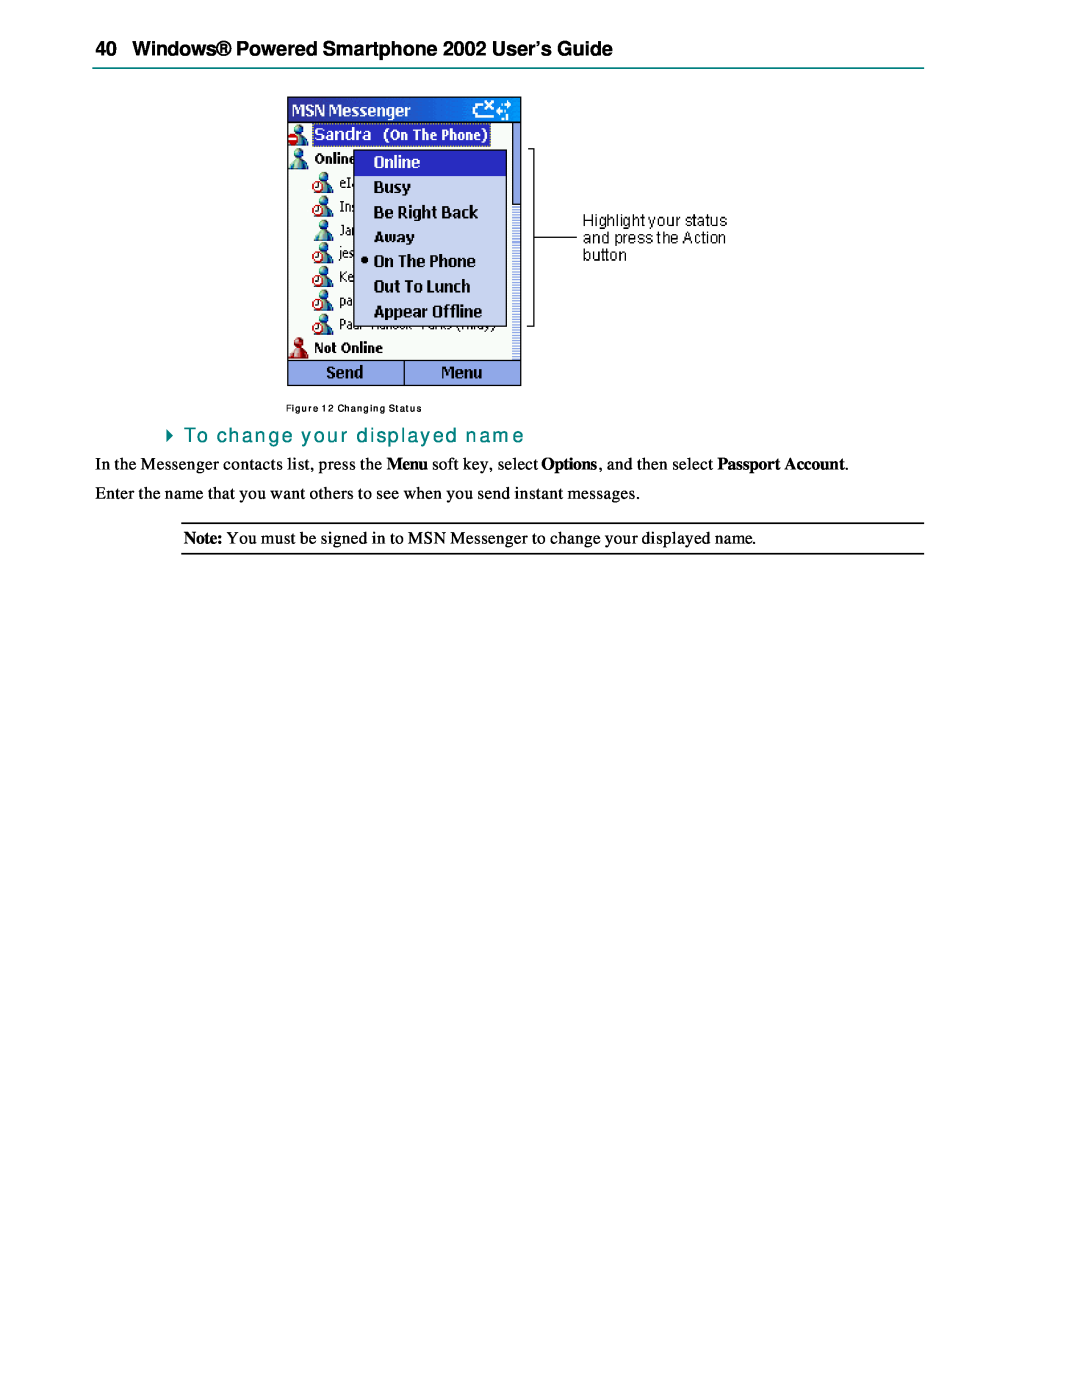 Microsoft manual Windows Powered Smartphone 2002 User’s Guide, To change your displayed name 